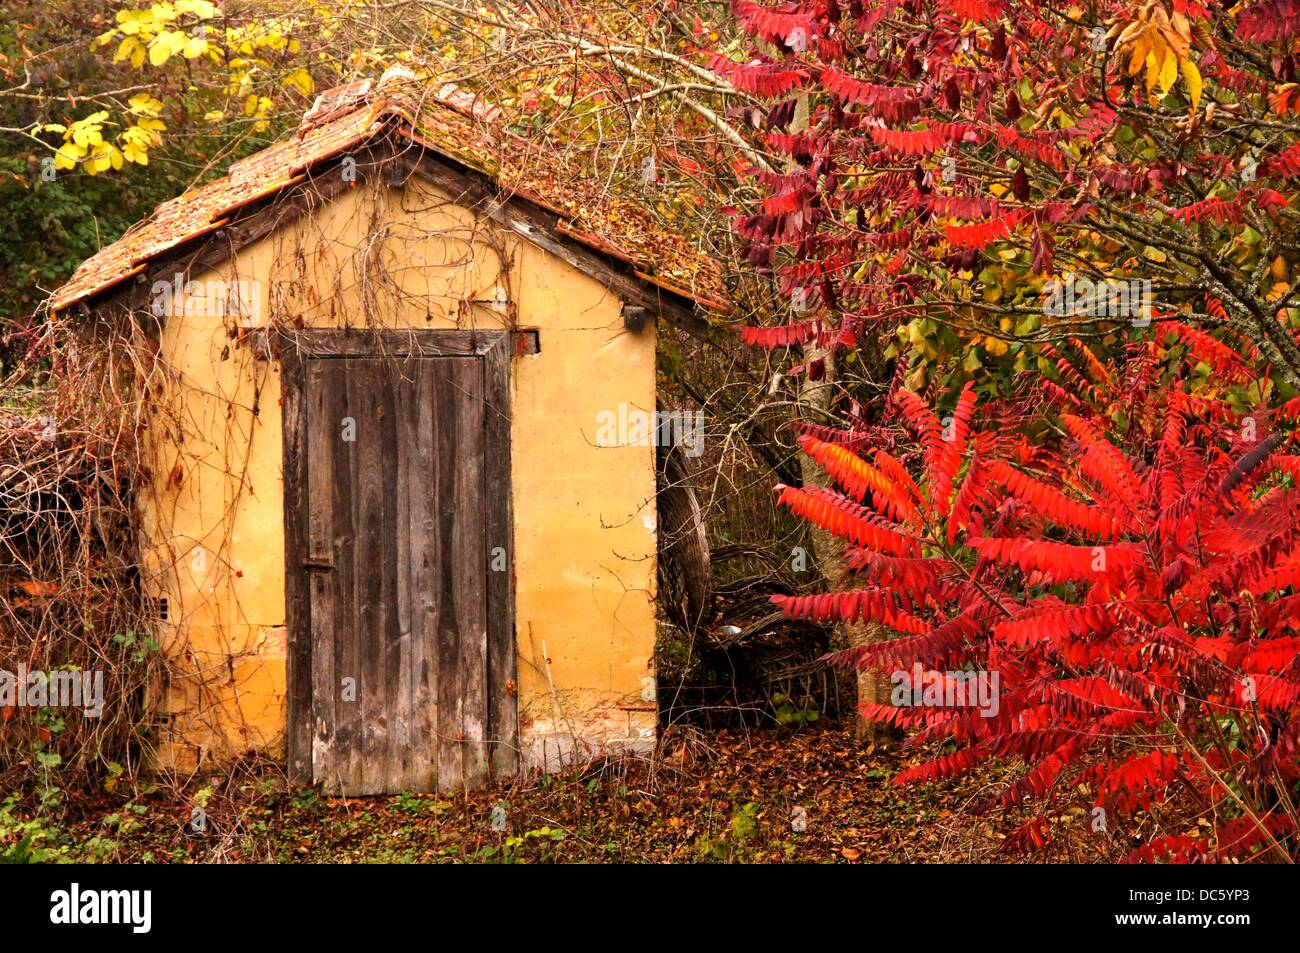 Old cabin in a garden, Lannepax, Gers, Midi-Pyrenees, France Stock Photo